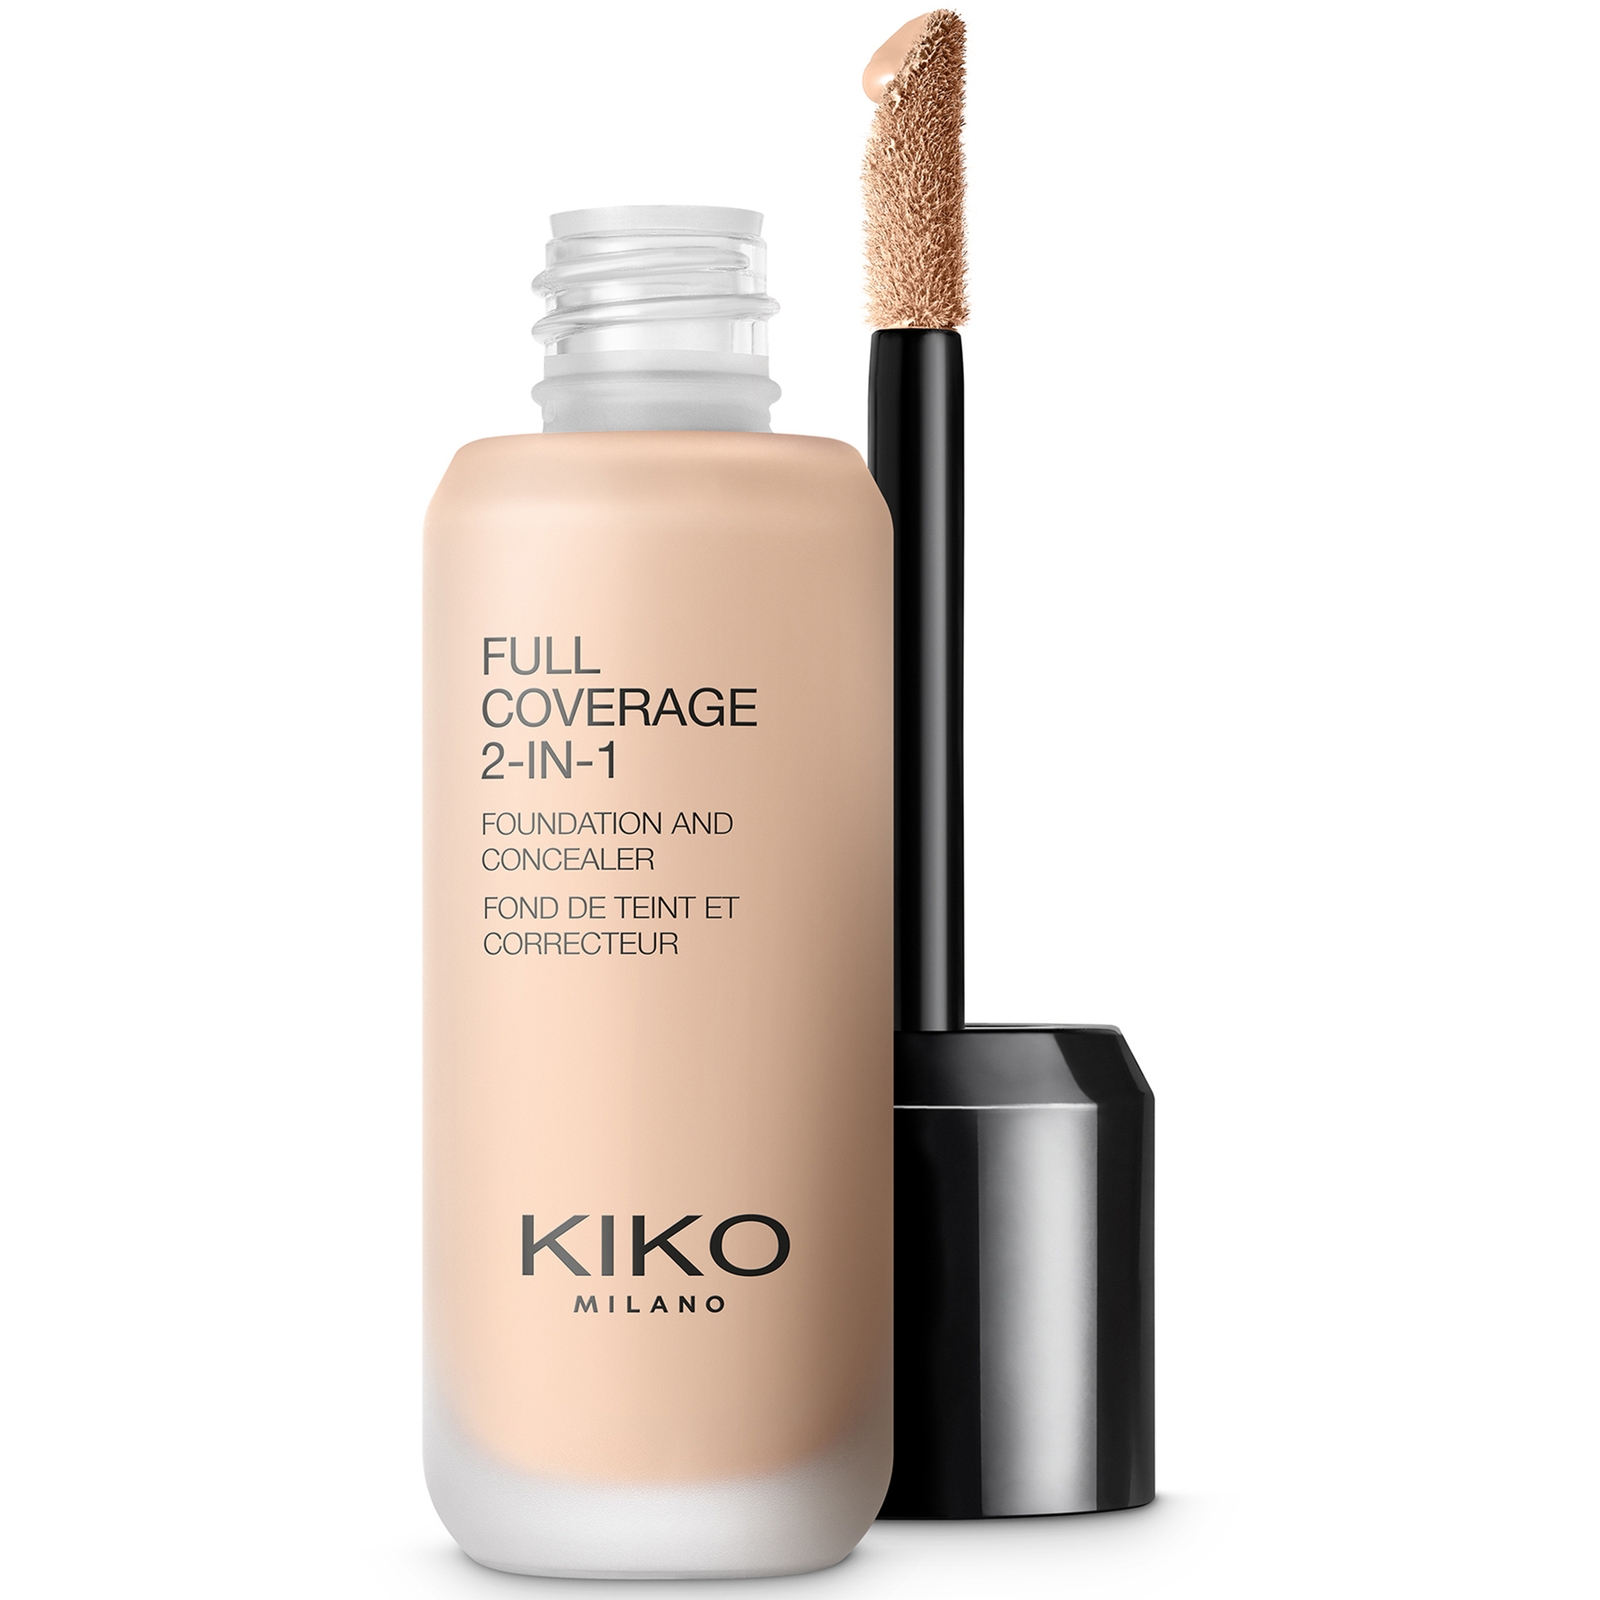 KIKO Milano Full Coverage 2-in-1 Foundation and Concealer 25ml (Various Shades) - 01 Neutral